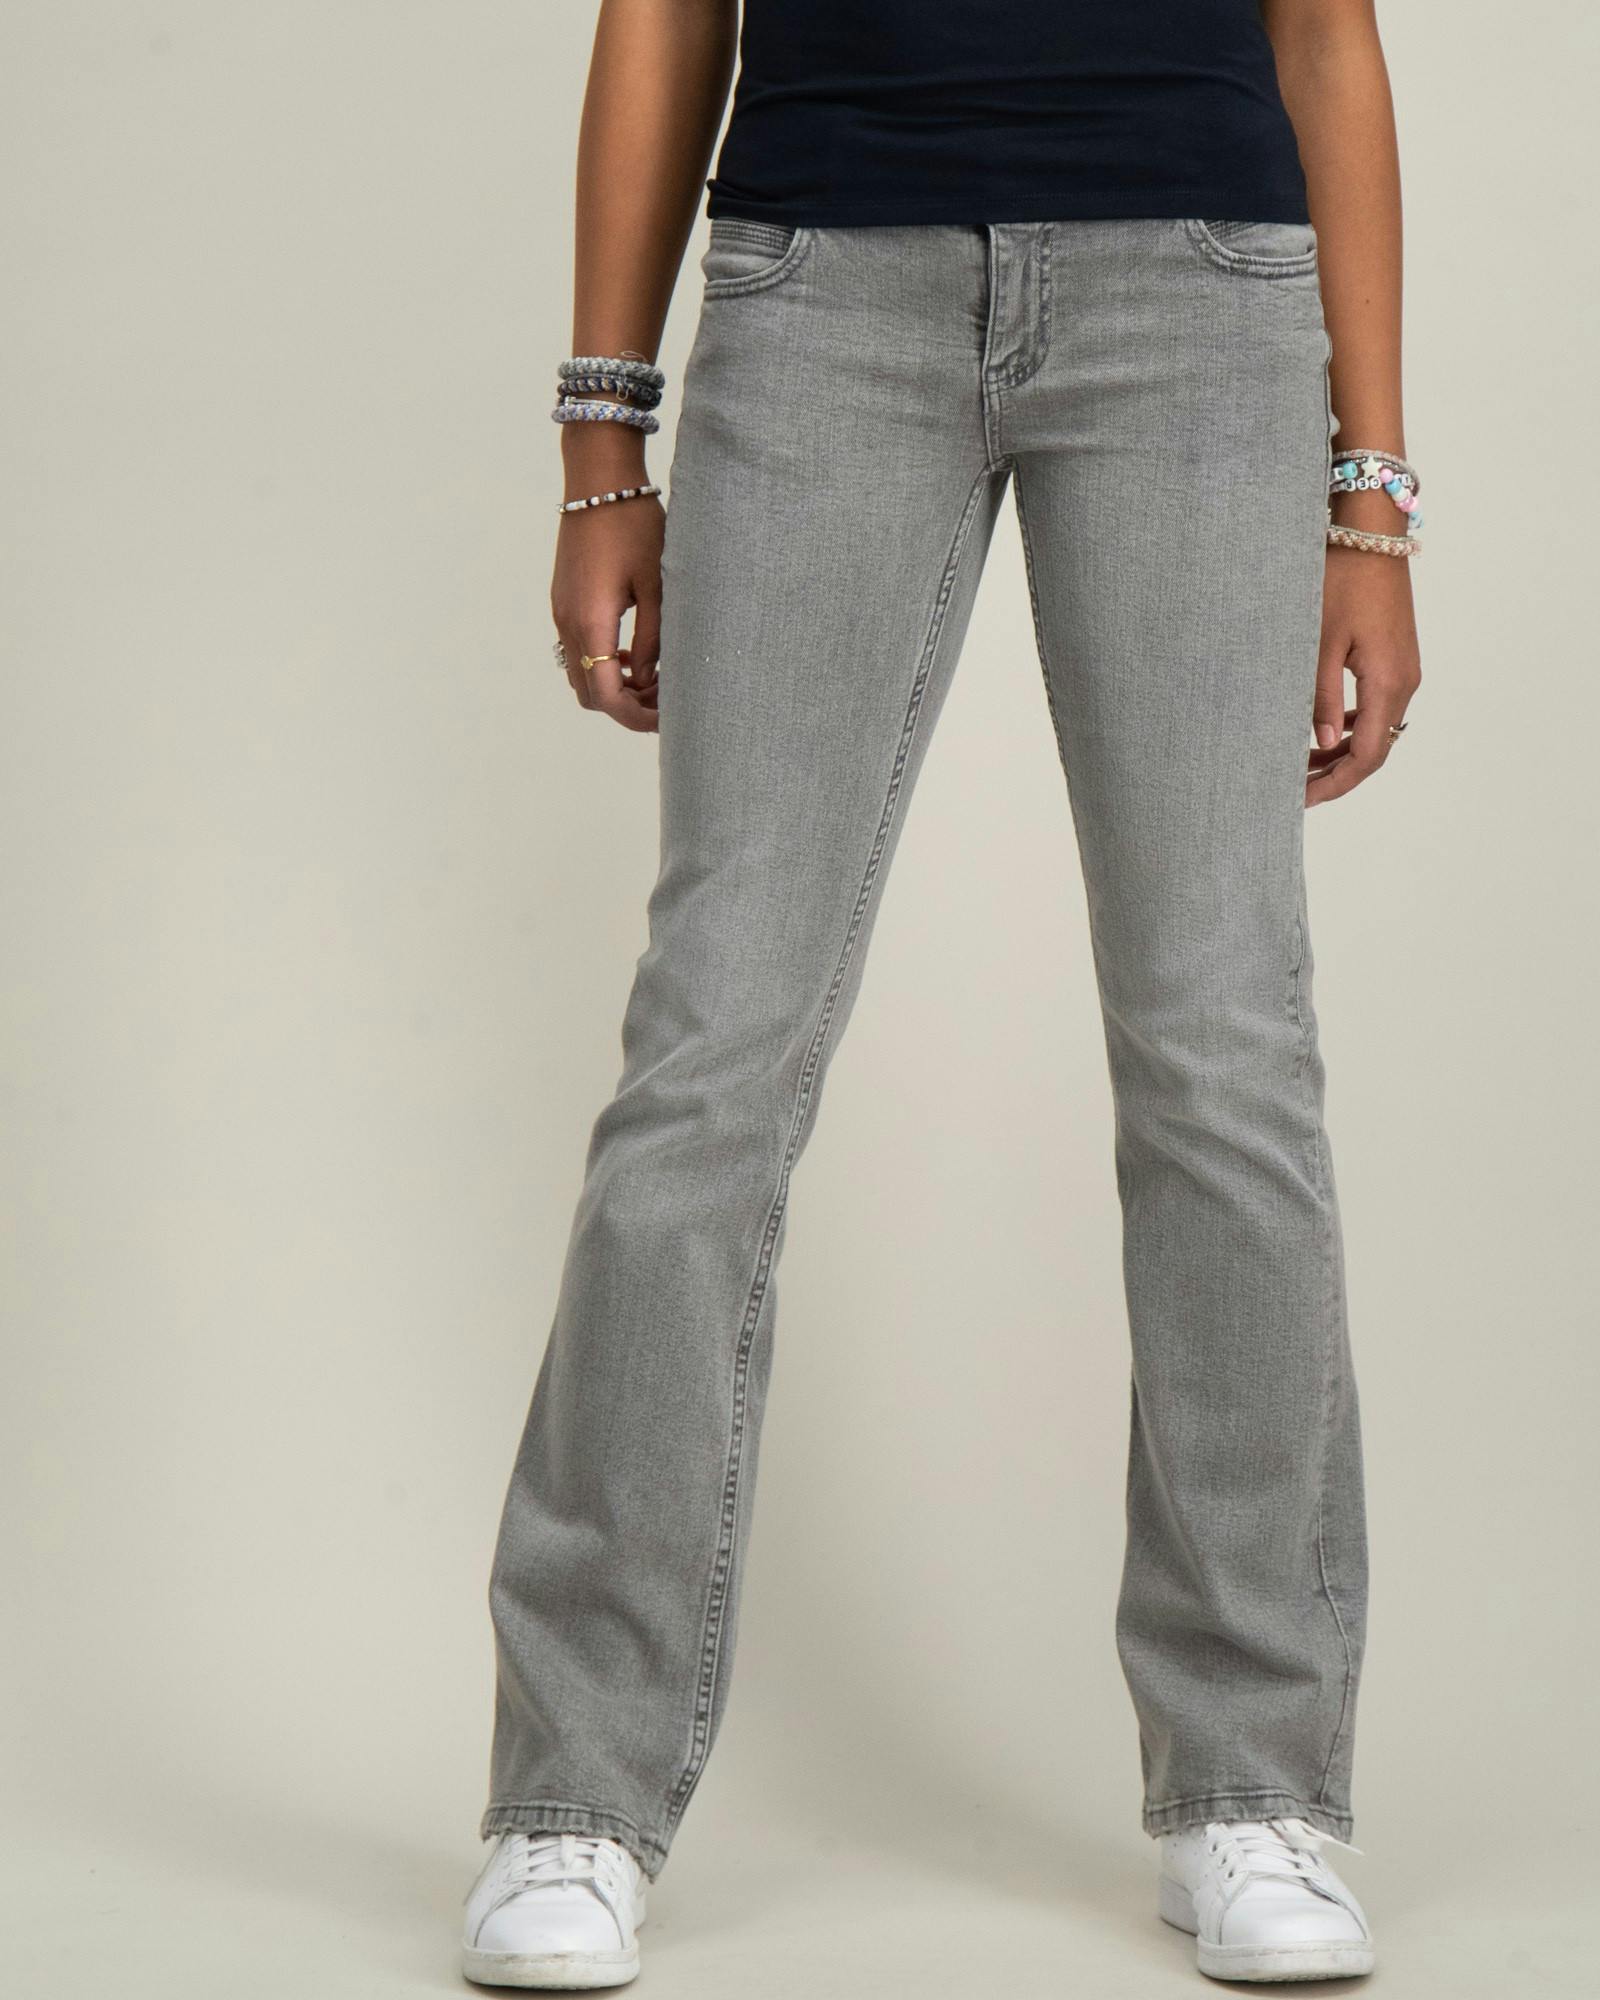 Low flare star jeans